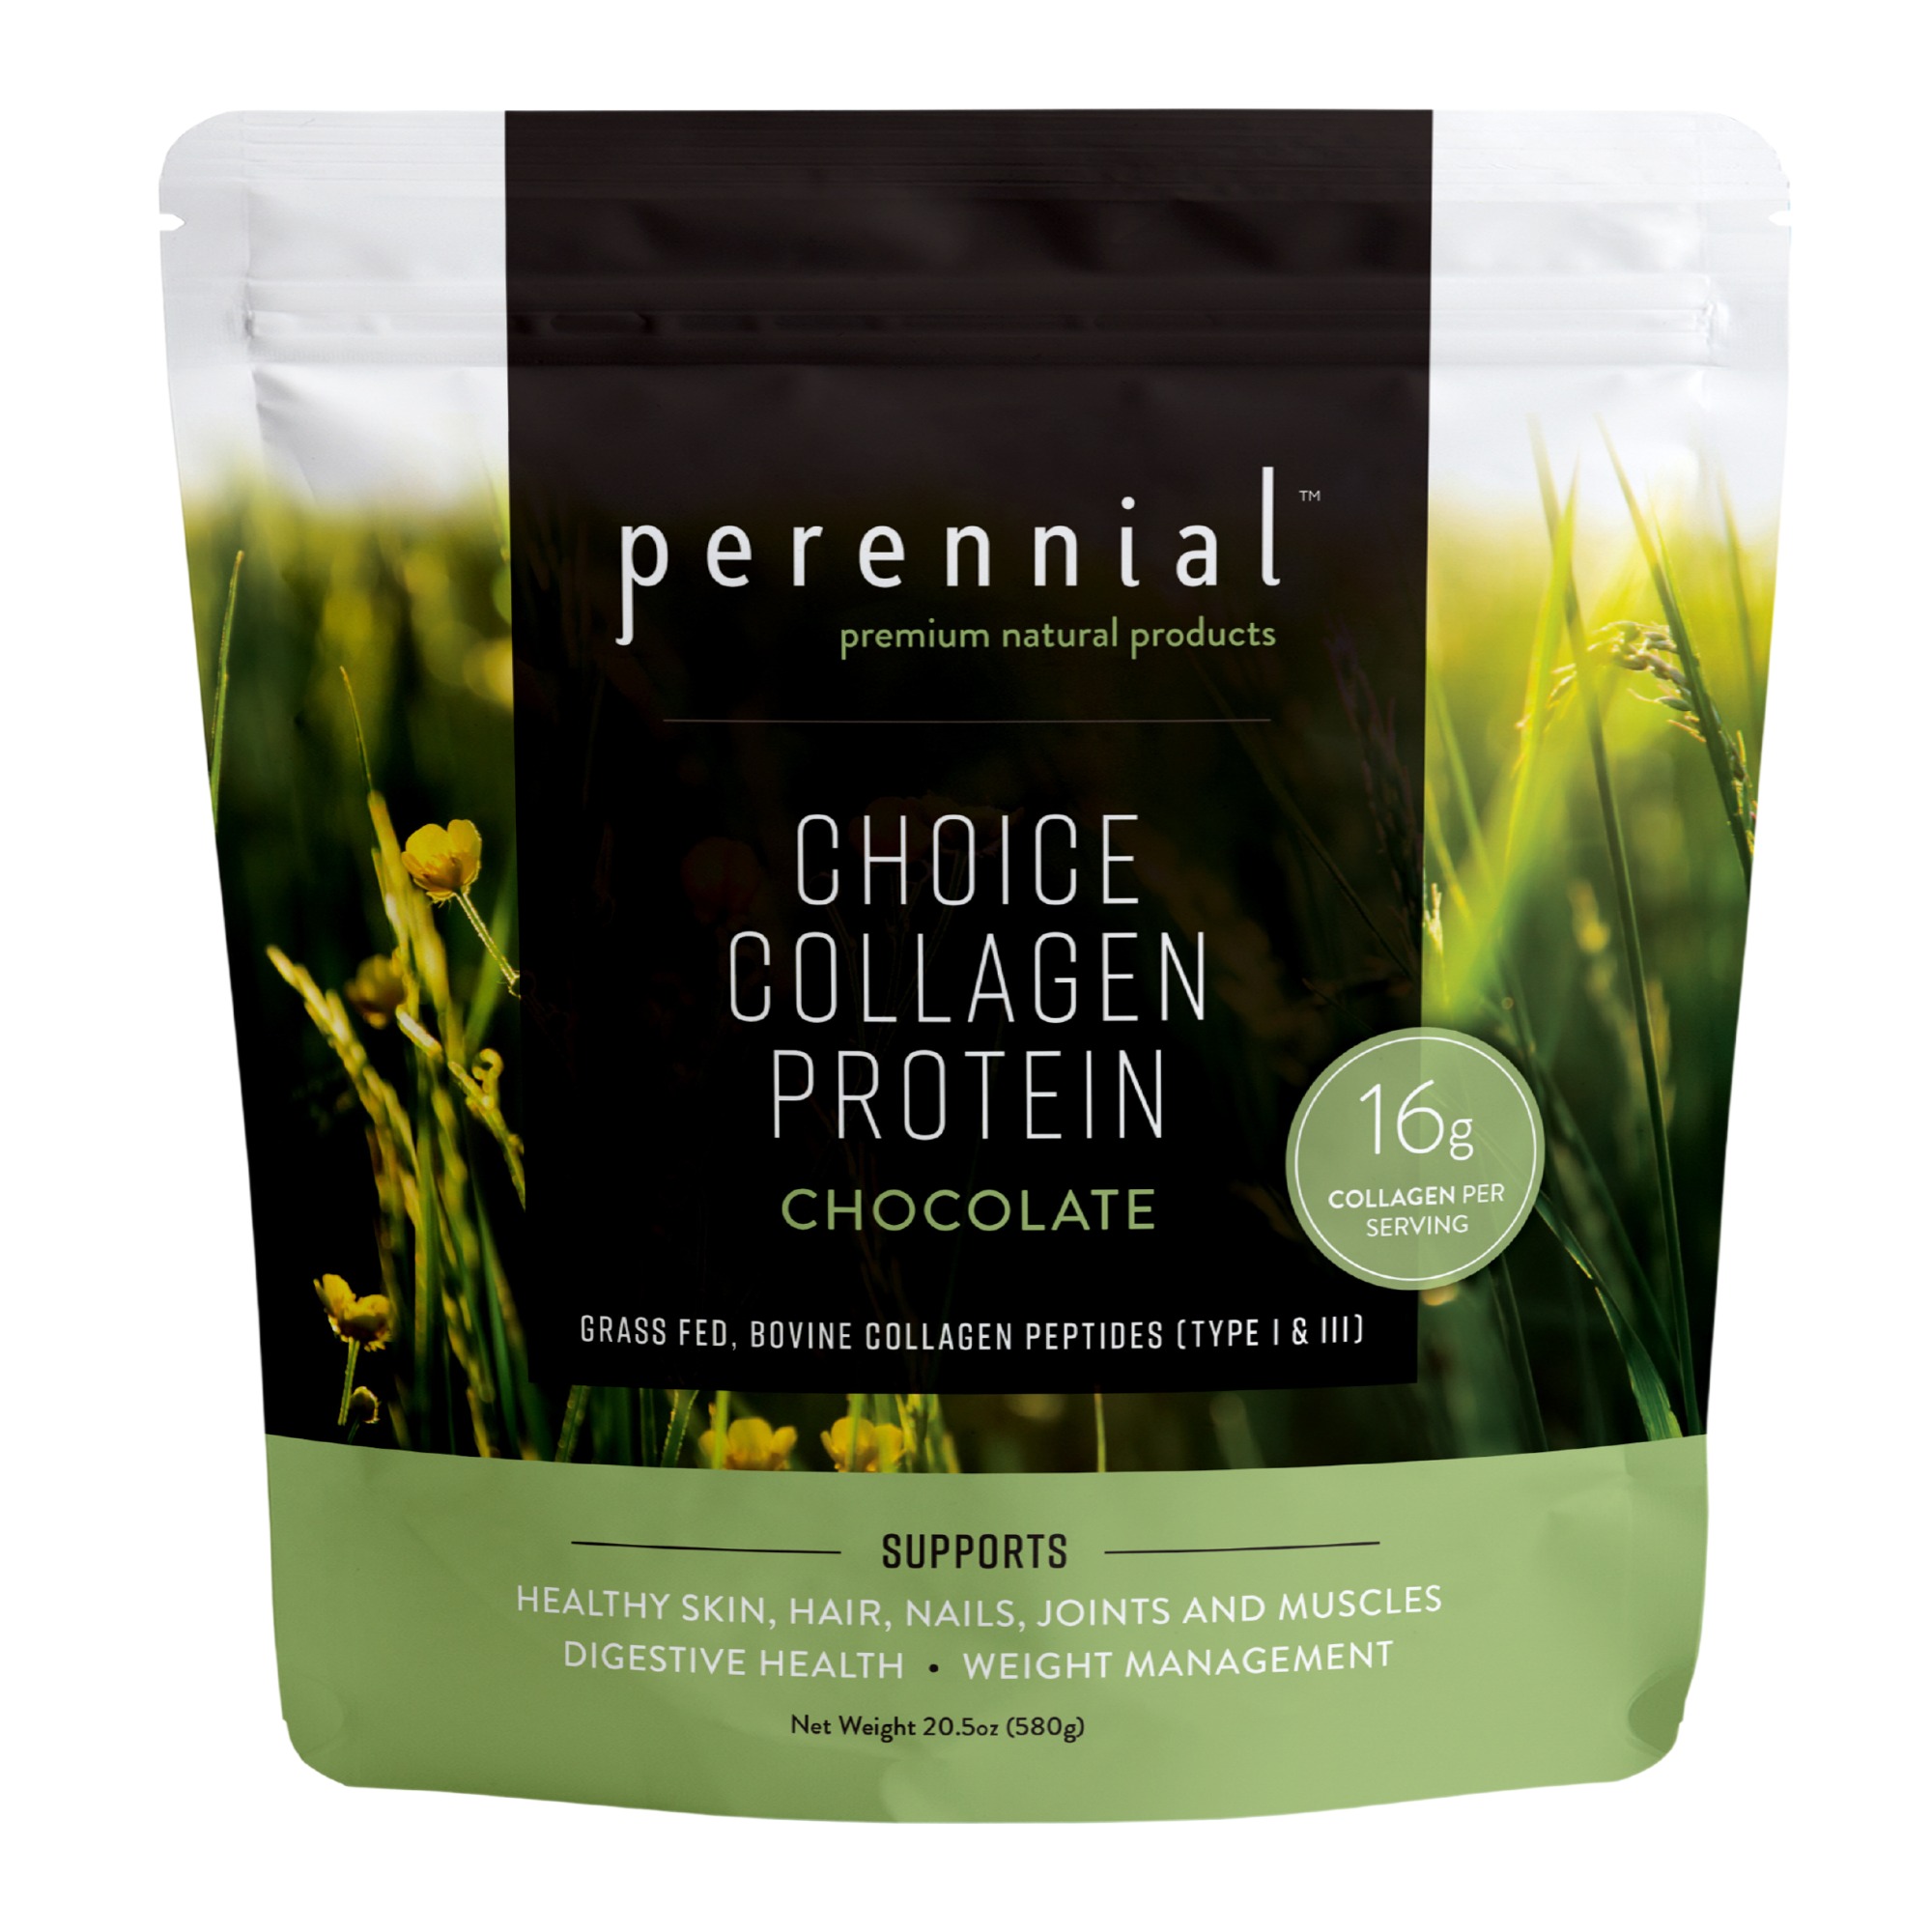 Choice Collagen Protein: Chocolate - Perennial Life Natural Collagen Protein (NOW in Pouches)